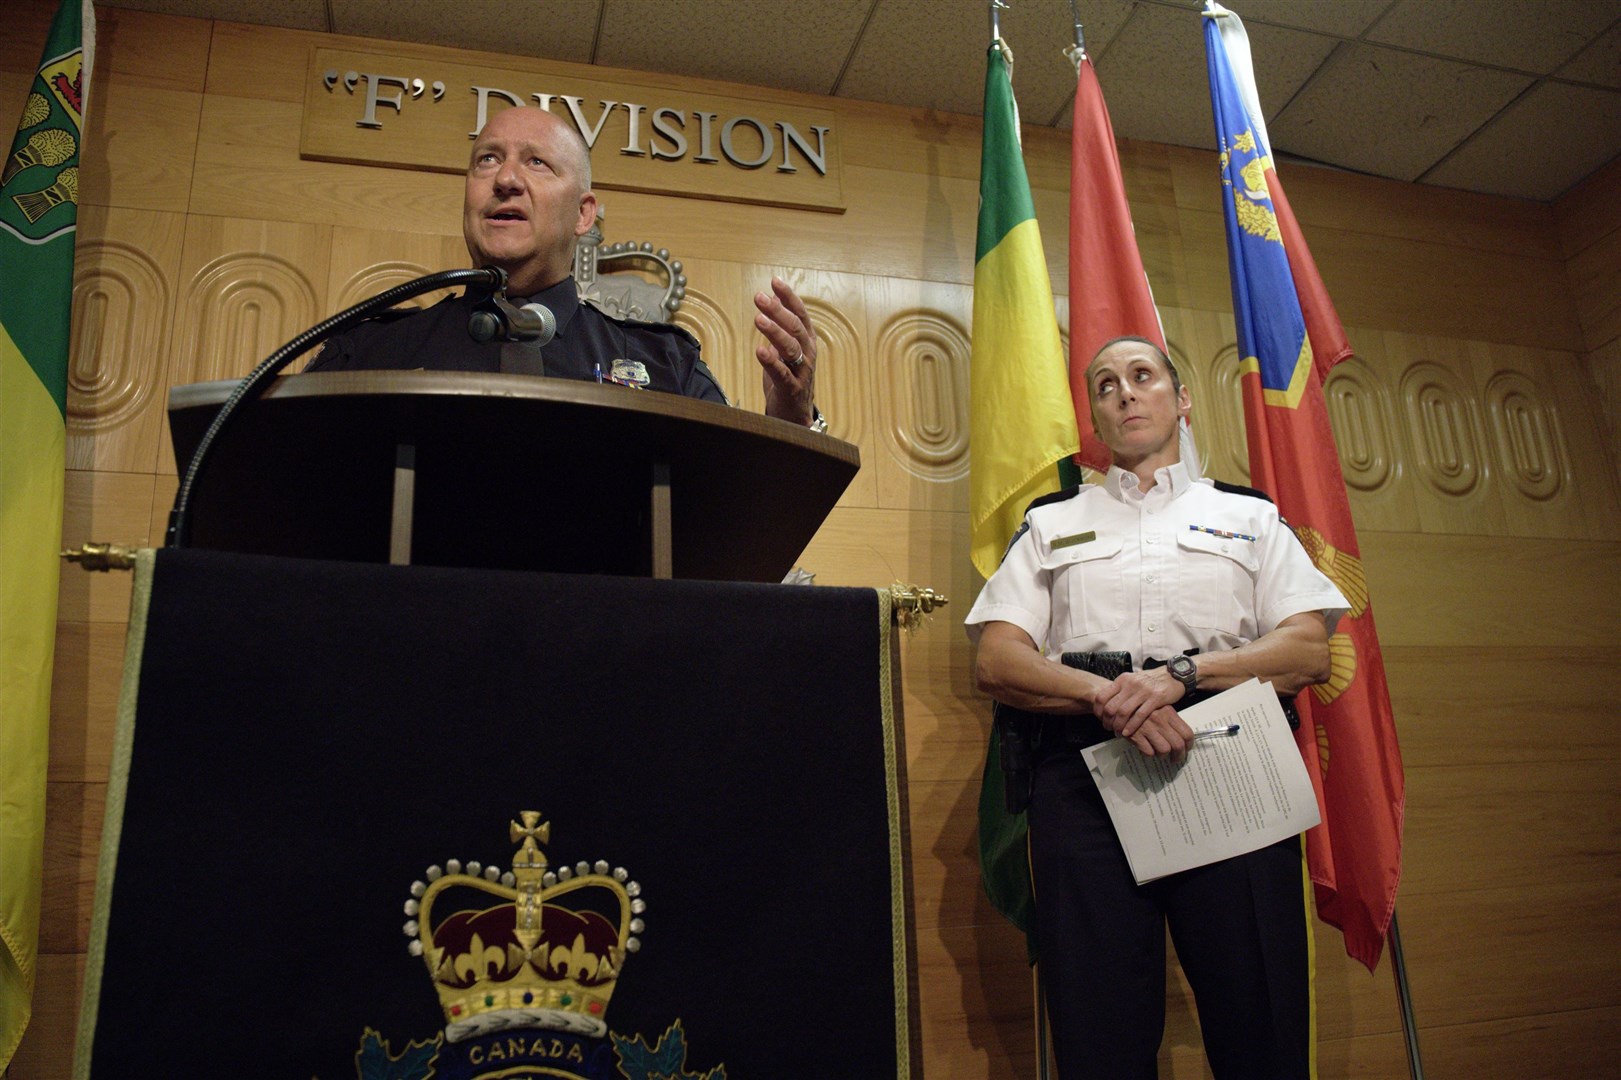 Regina Police Chief Evan Bray, left, speaks while Assistant Commissioner Rhonda Blackmore, right, looks on during a press conference at Royal Canadian Mounted Police Headquarters in Regina, Saskatchewan (Michael Bell/AP/PA)